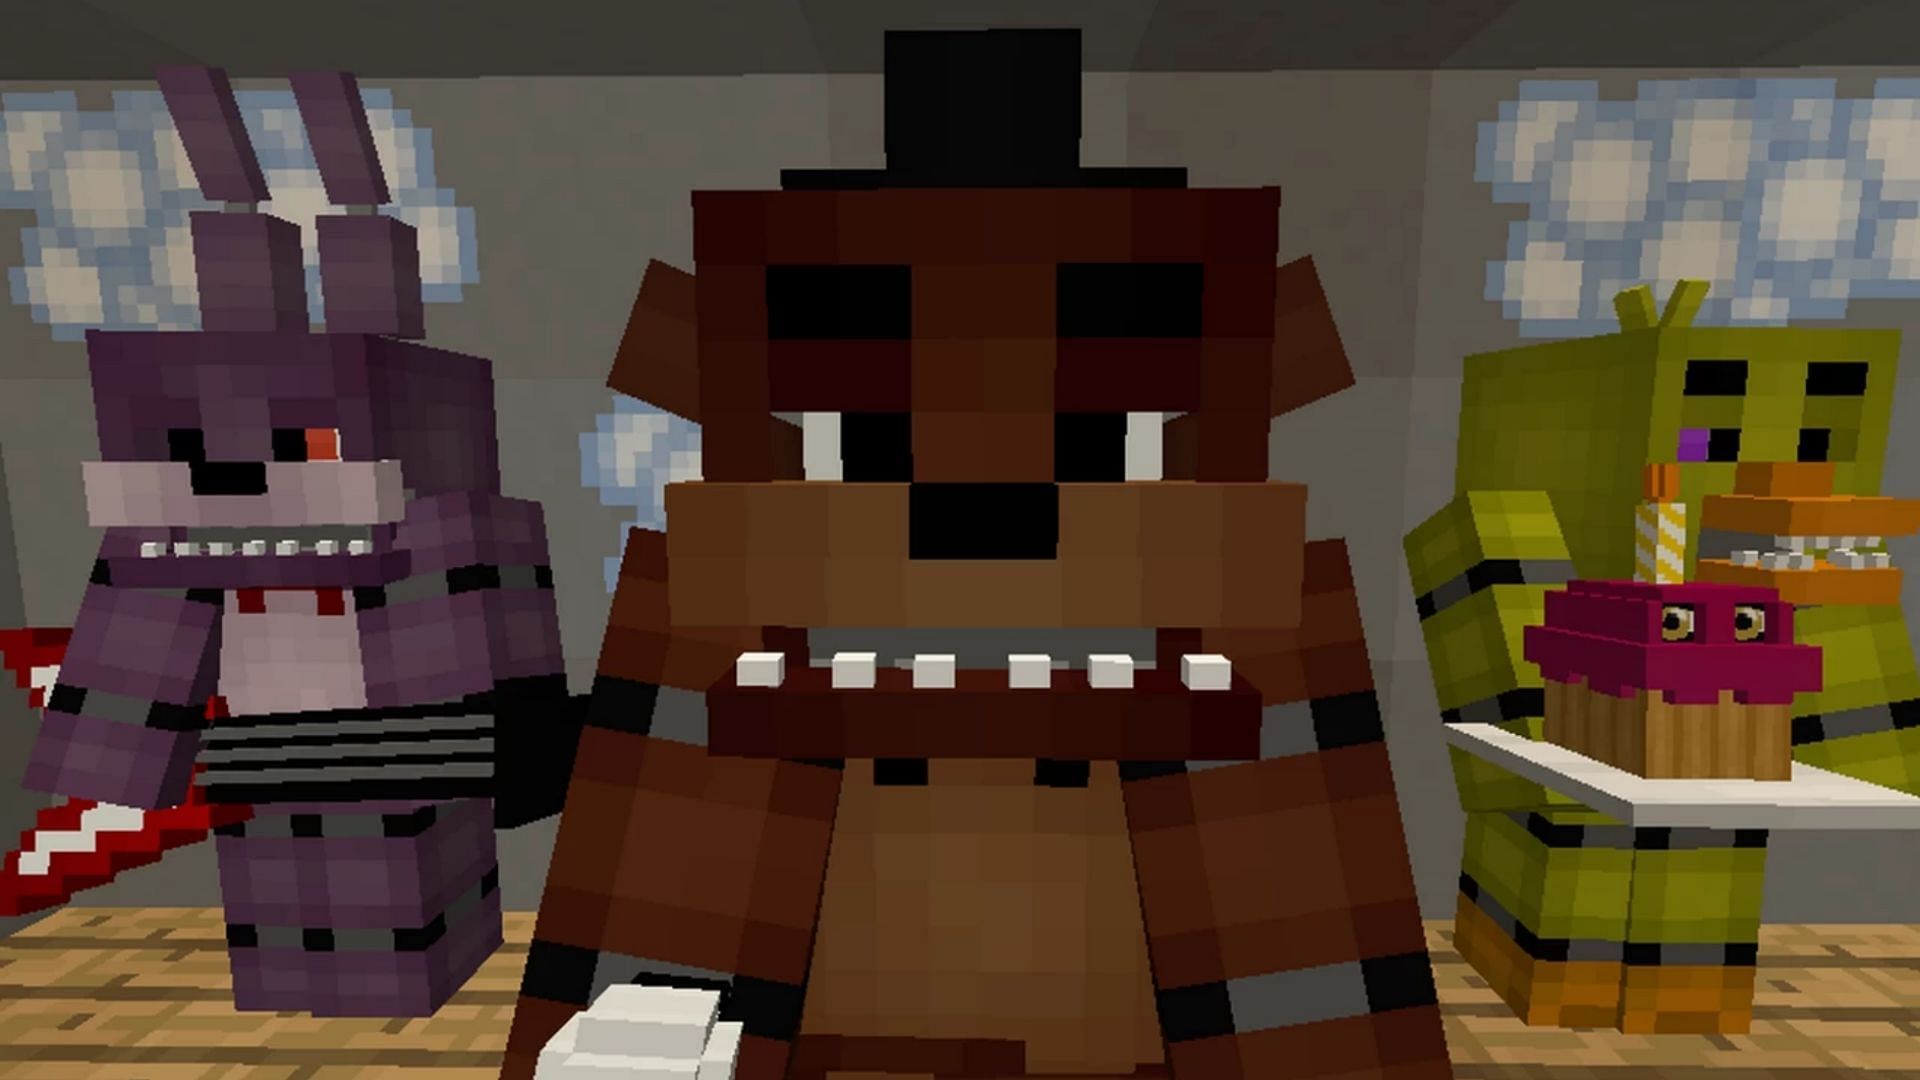 Five Nights at Freddy&#039;s is one of the most popular horror games (Image via planetminecraft.com)